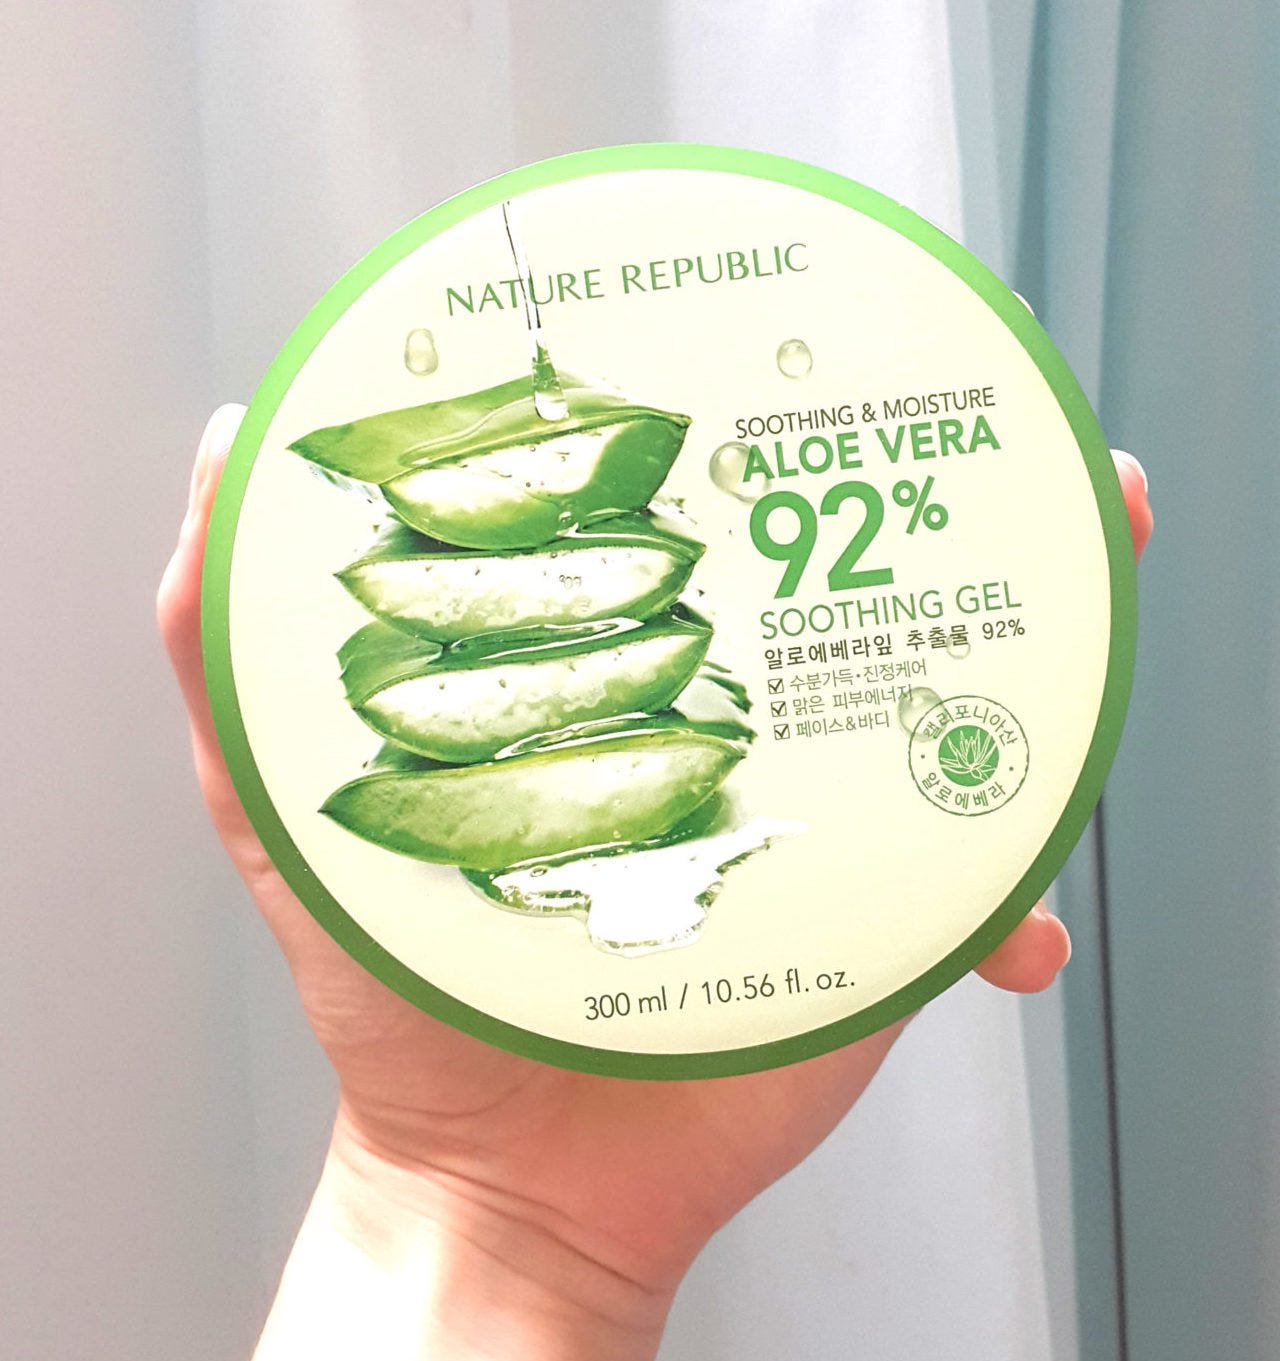 grænse bacon Transplant 7 Amazing ways to use Nature Republic Aloe Vera 92% Soothing Gel | Review |  by Cosme Perks | Medium